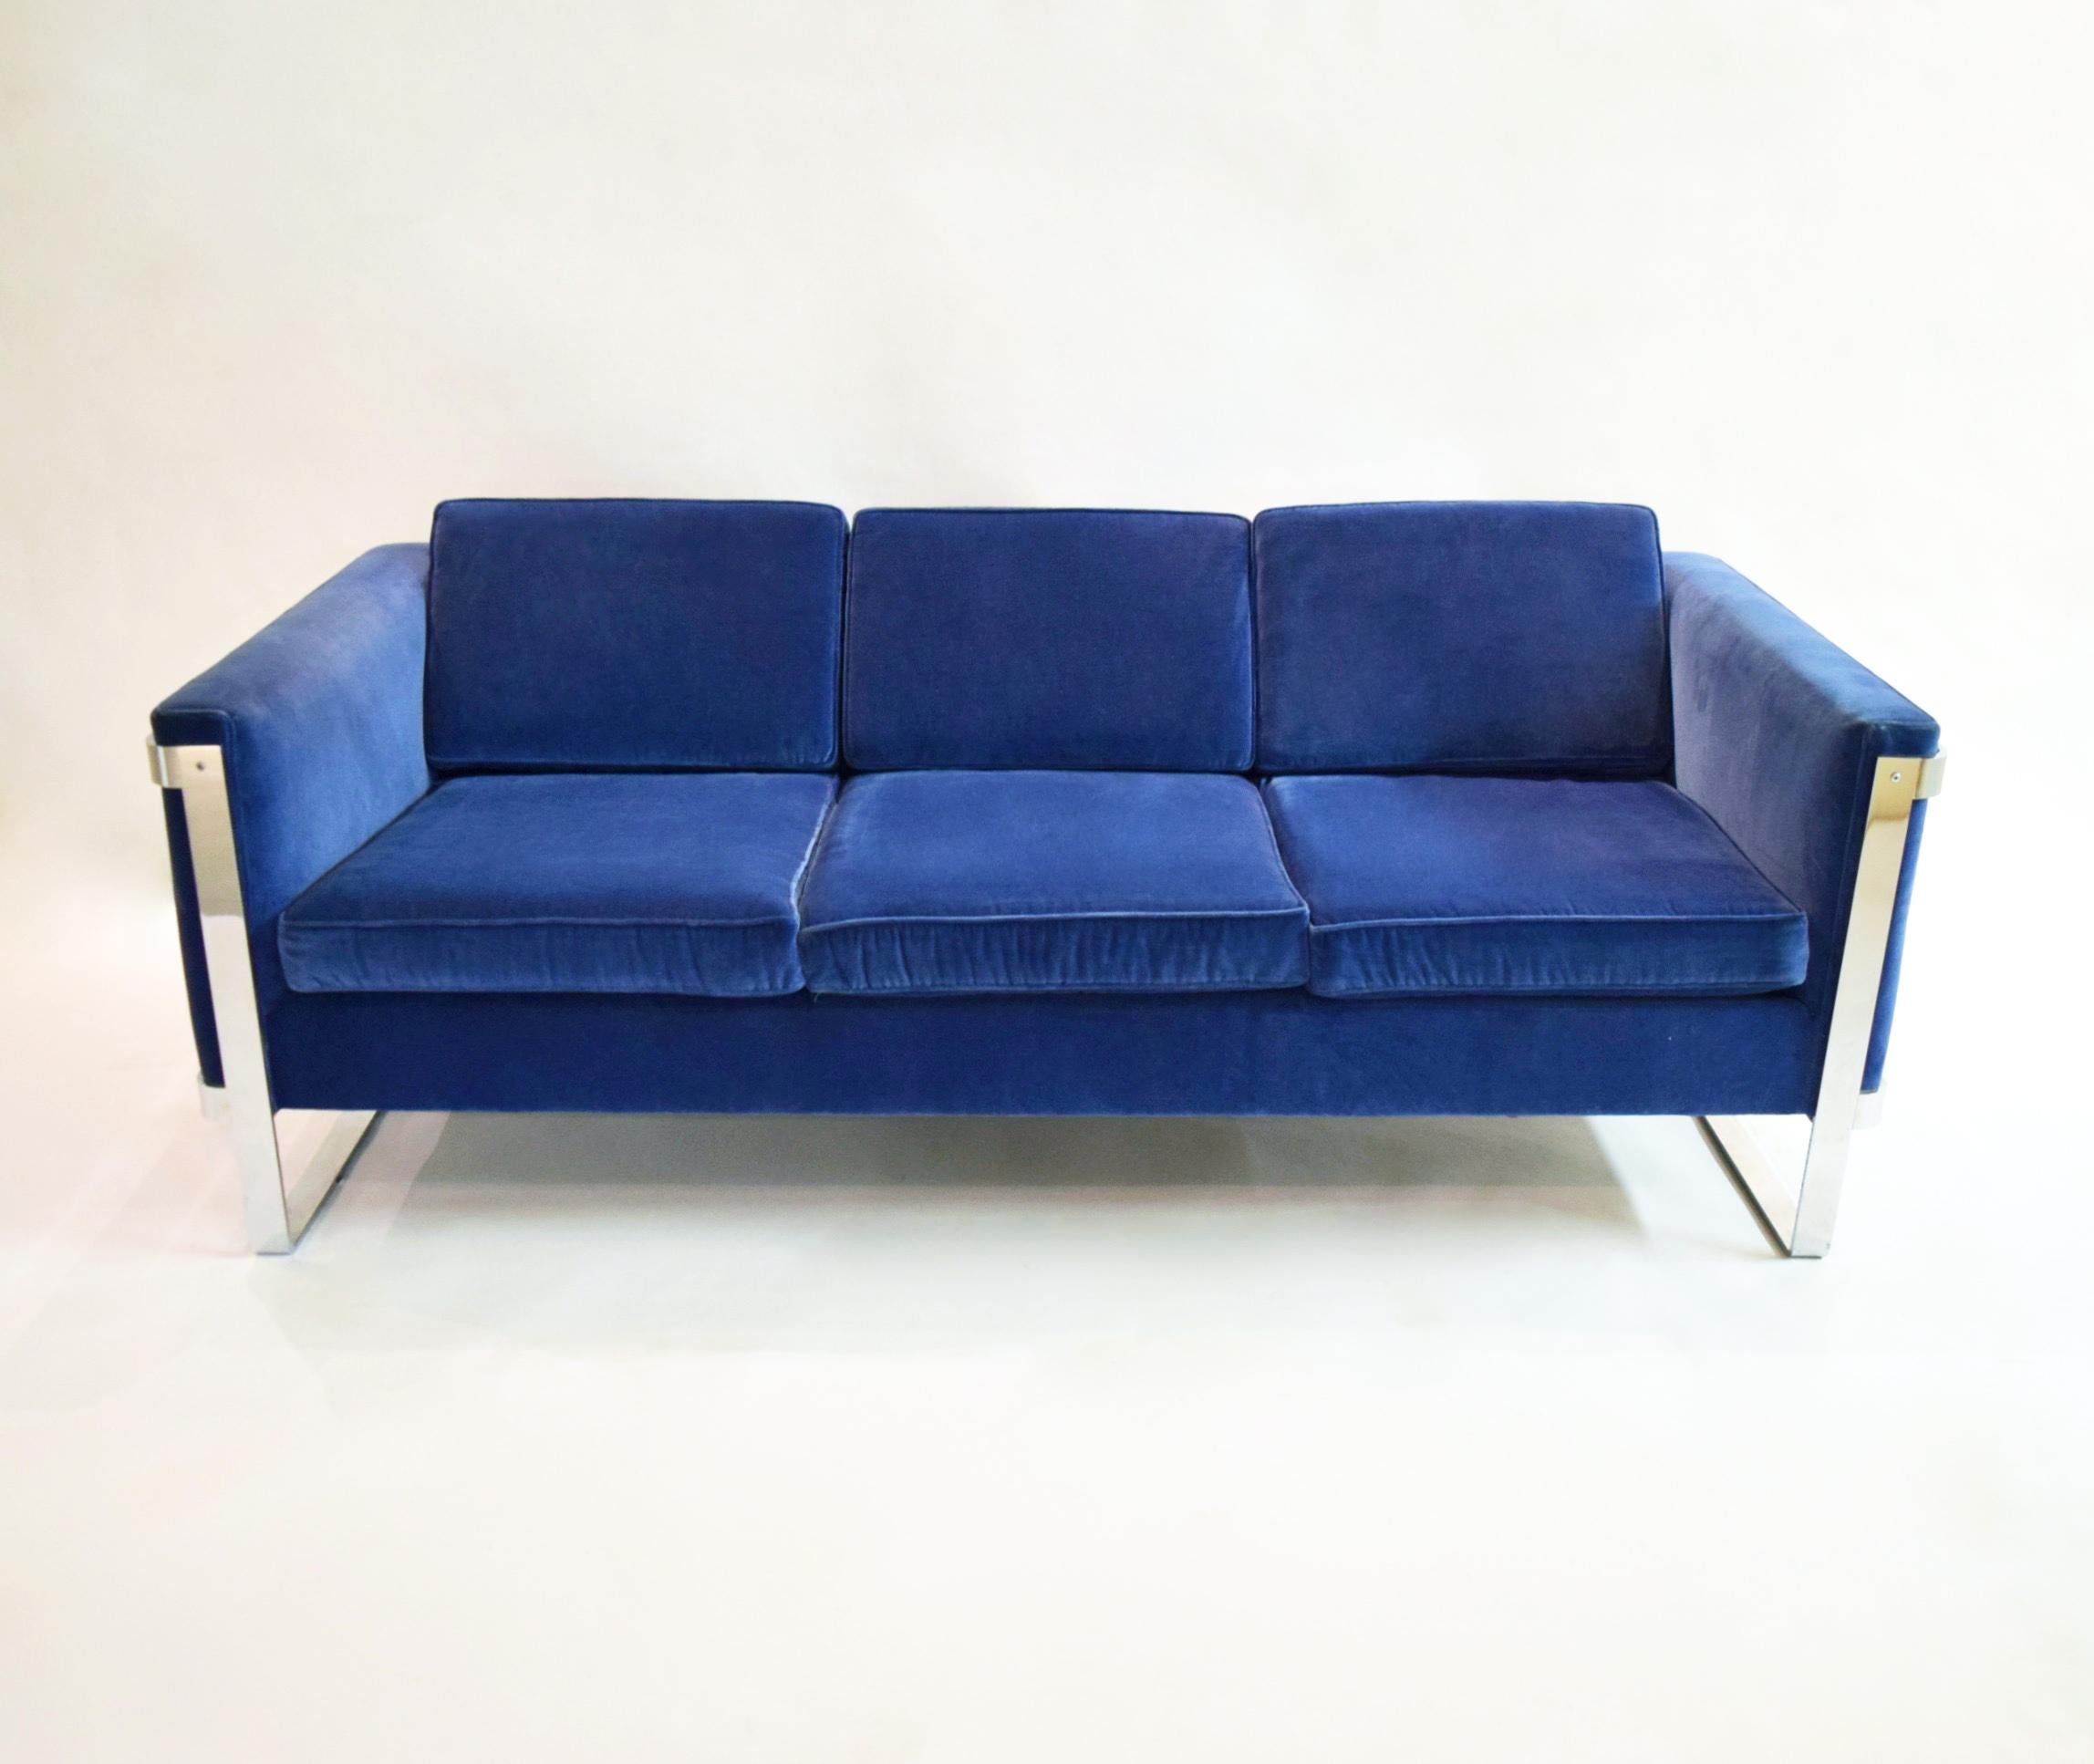 Steel Three-Seat Sofa by Pace Collection, USA, circa 1975